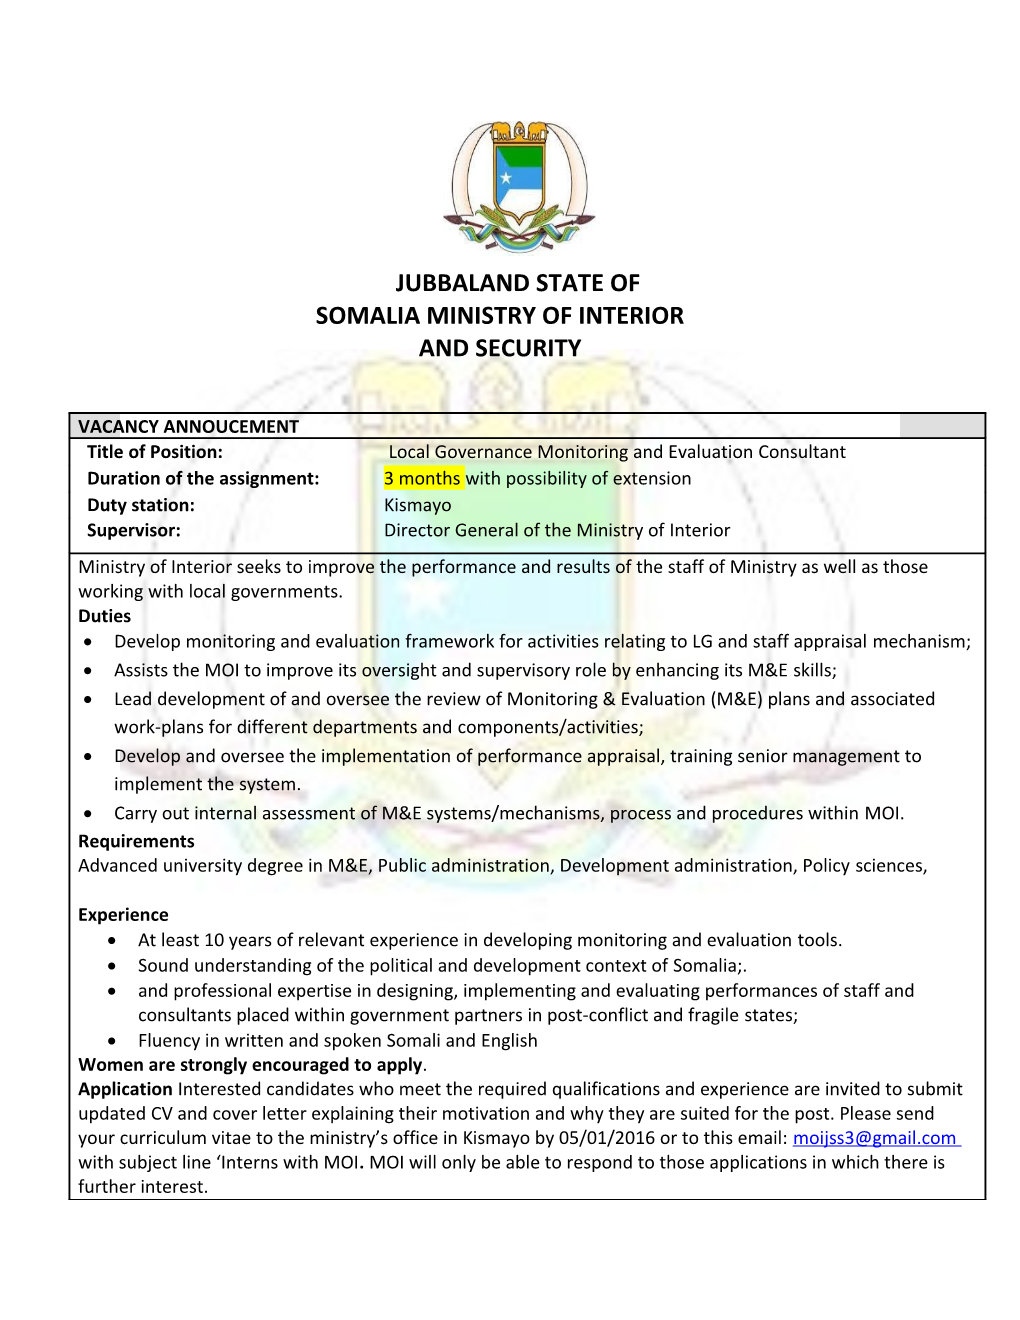 Jubbaland State of Somalia Ministry of Interior Andsecurity